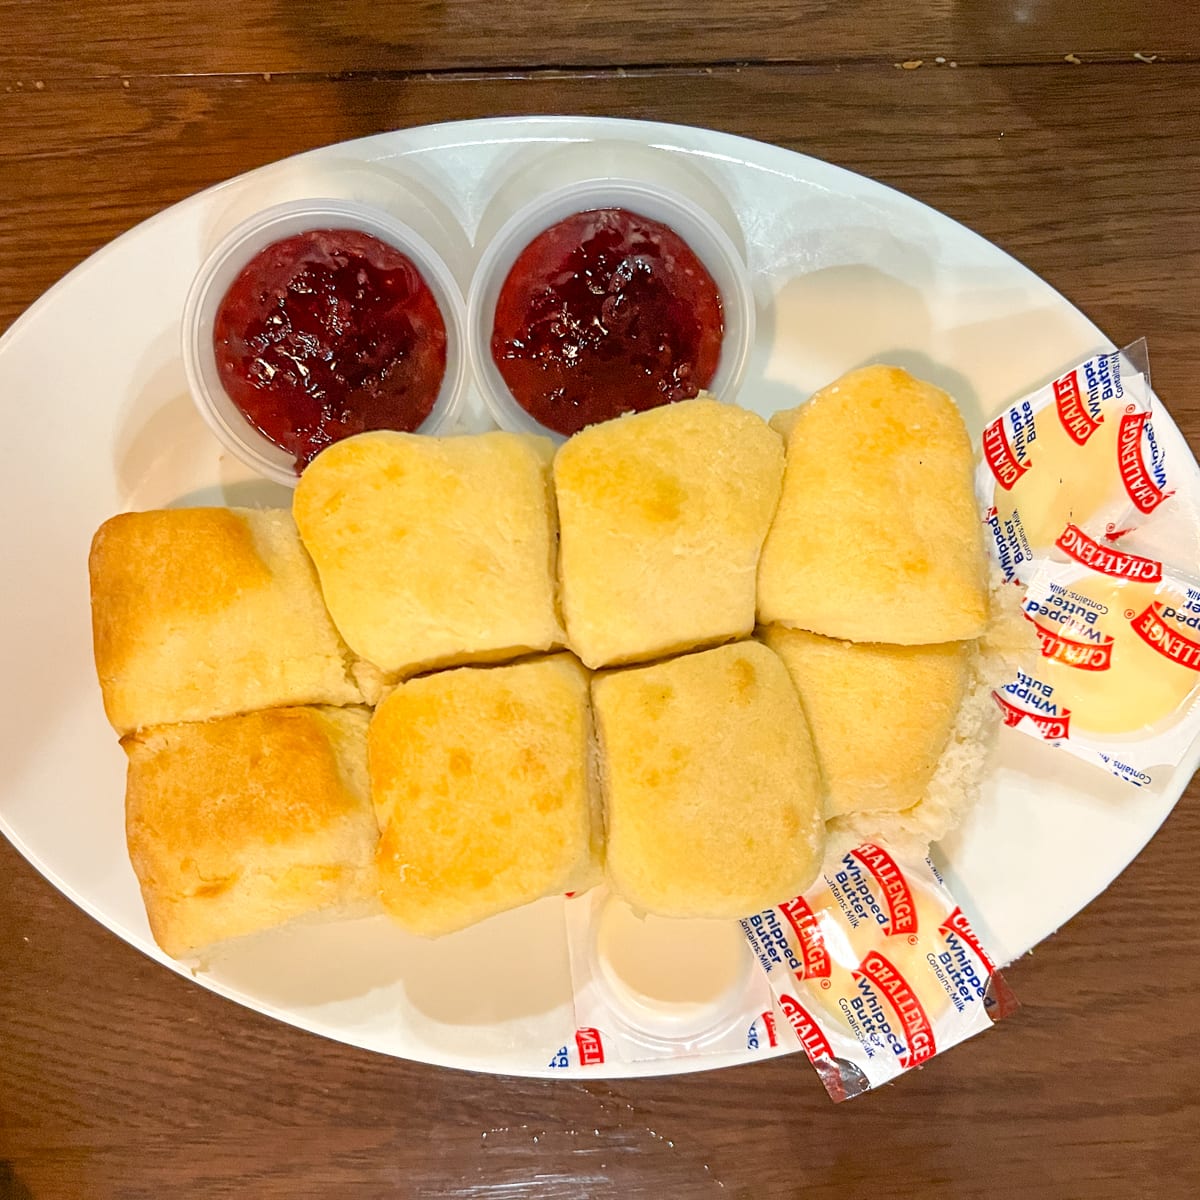 Mrs. Knott's Buttermilk biscuits and boysenberry jam